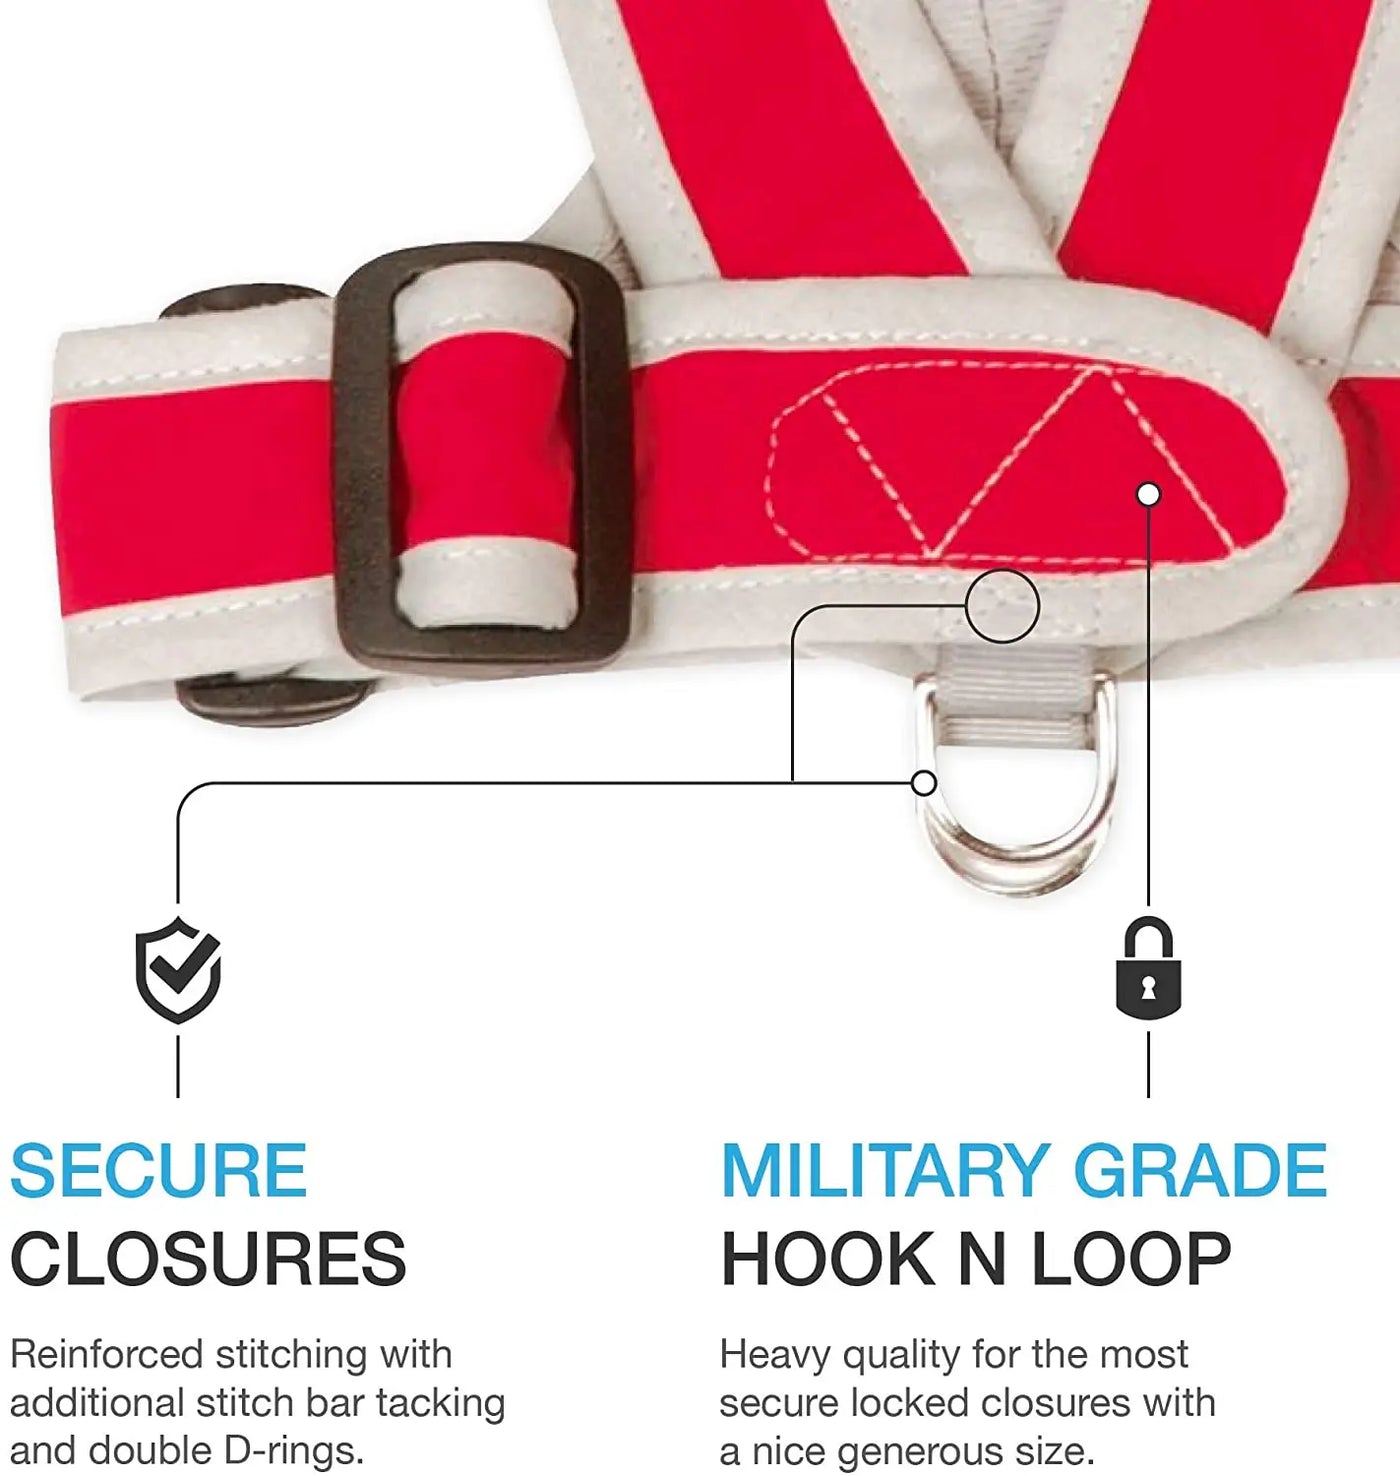 My Canine Kids Precision Fit Harness on Dog in Red